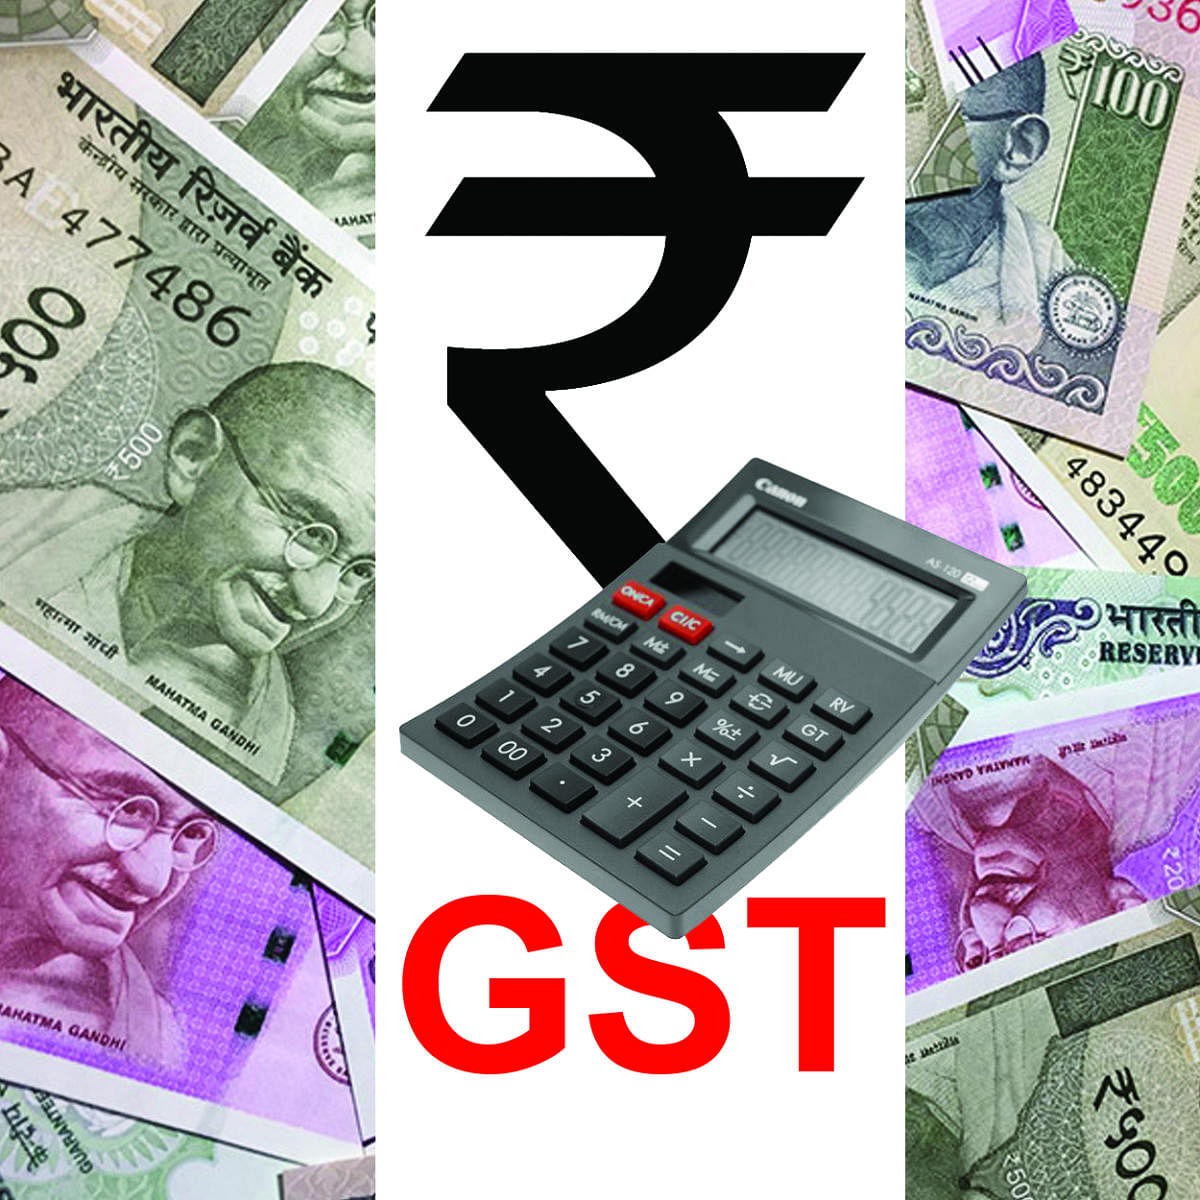 Hotels delegation wants banquet GST cut from 18% to 5%